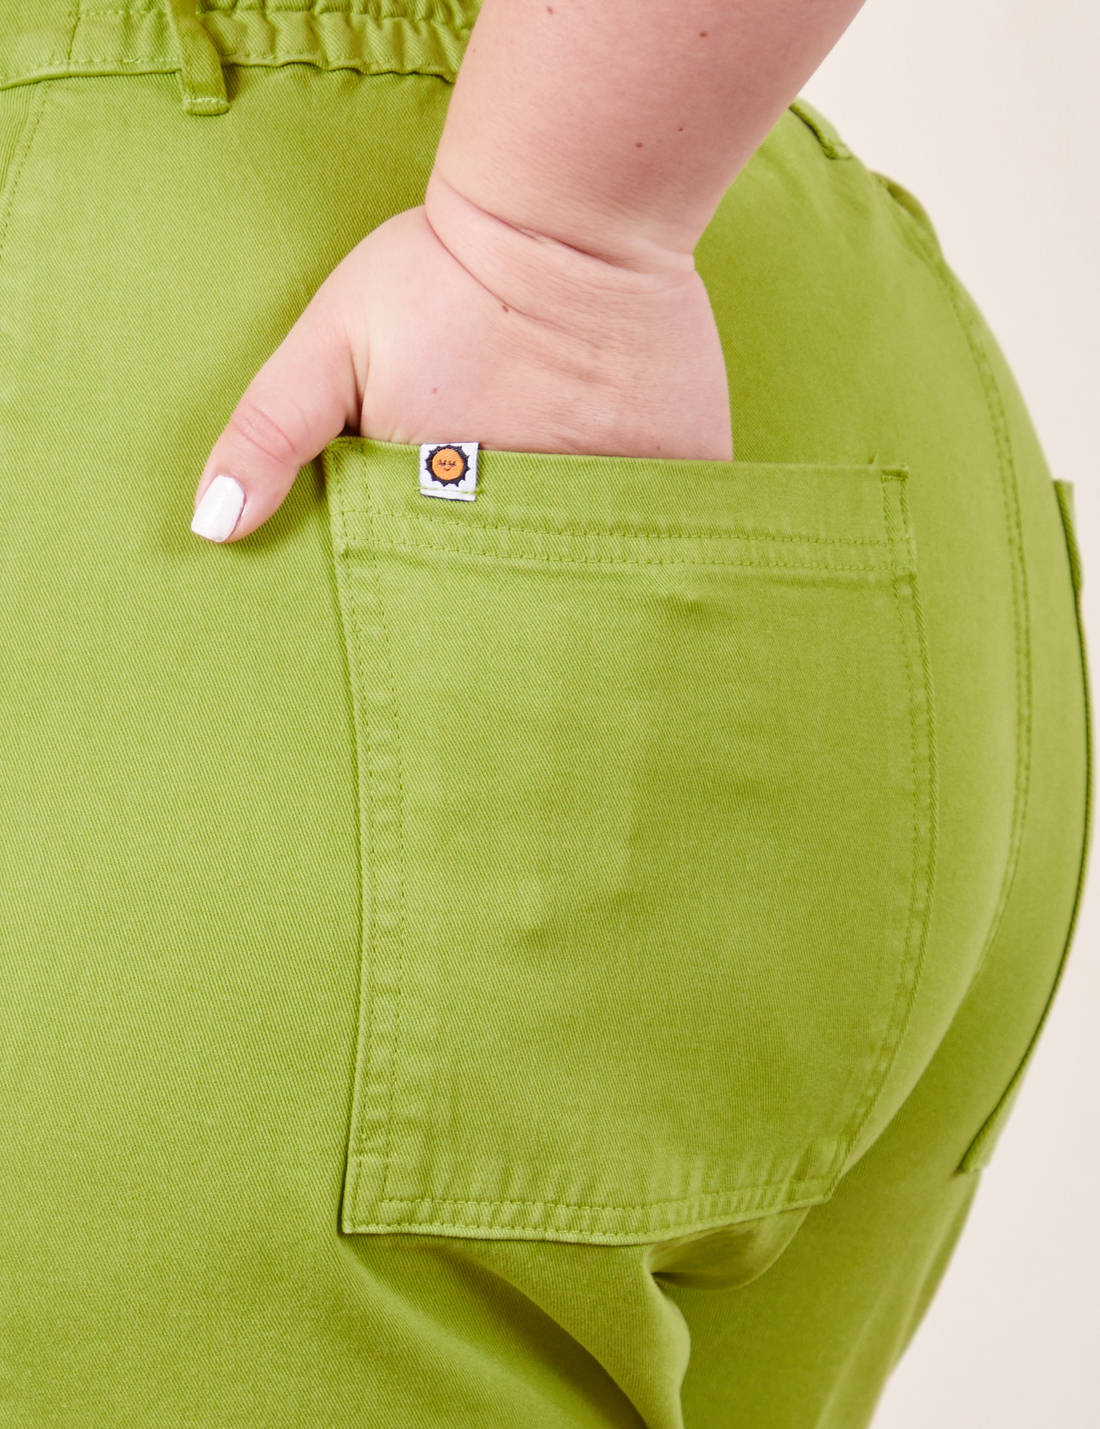 Back pocket close up of Western Pants in Gross Green. Worn by Ashley with her hand in the pocket.